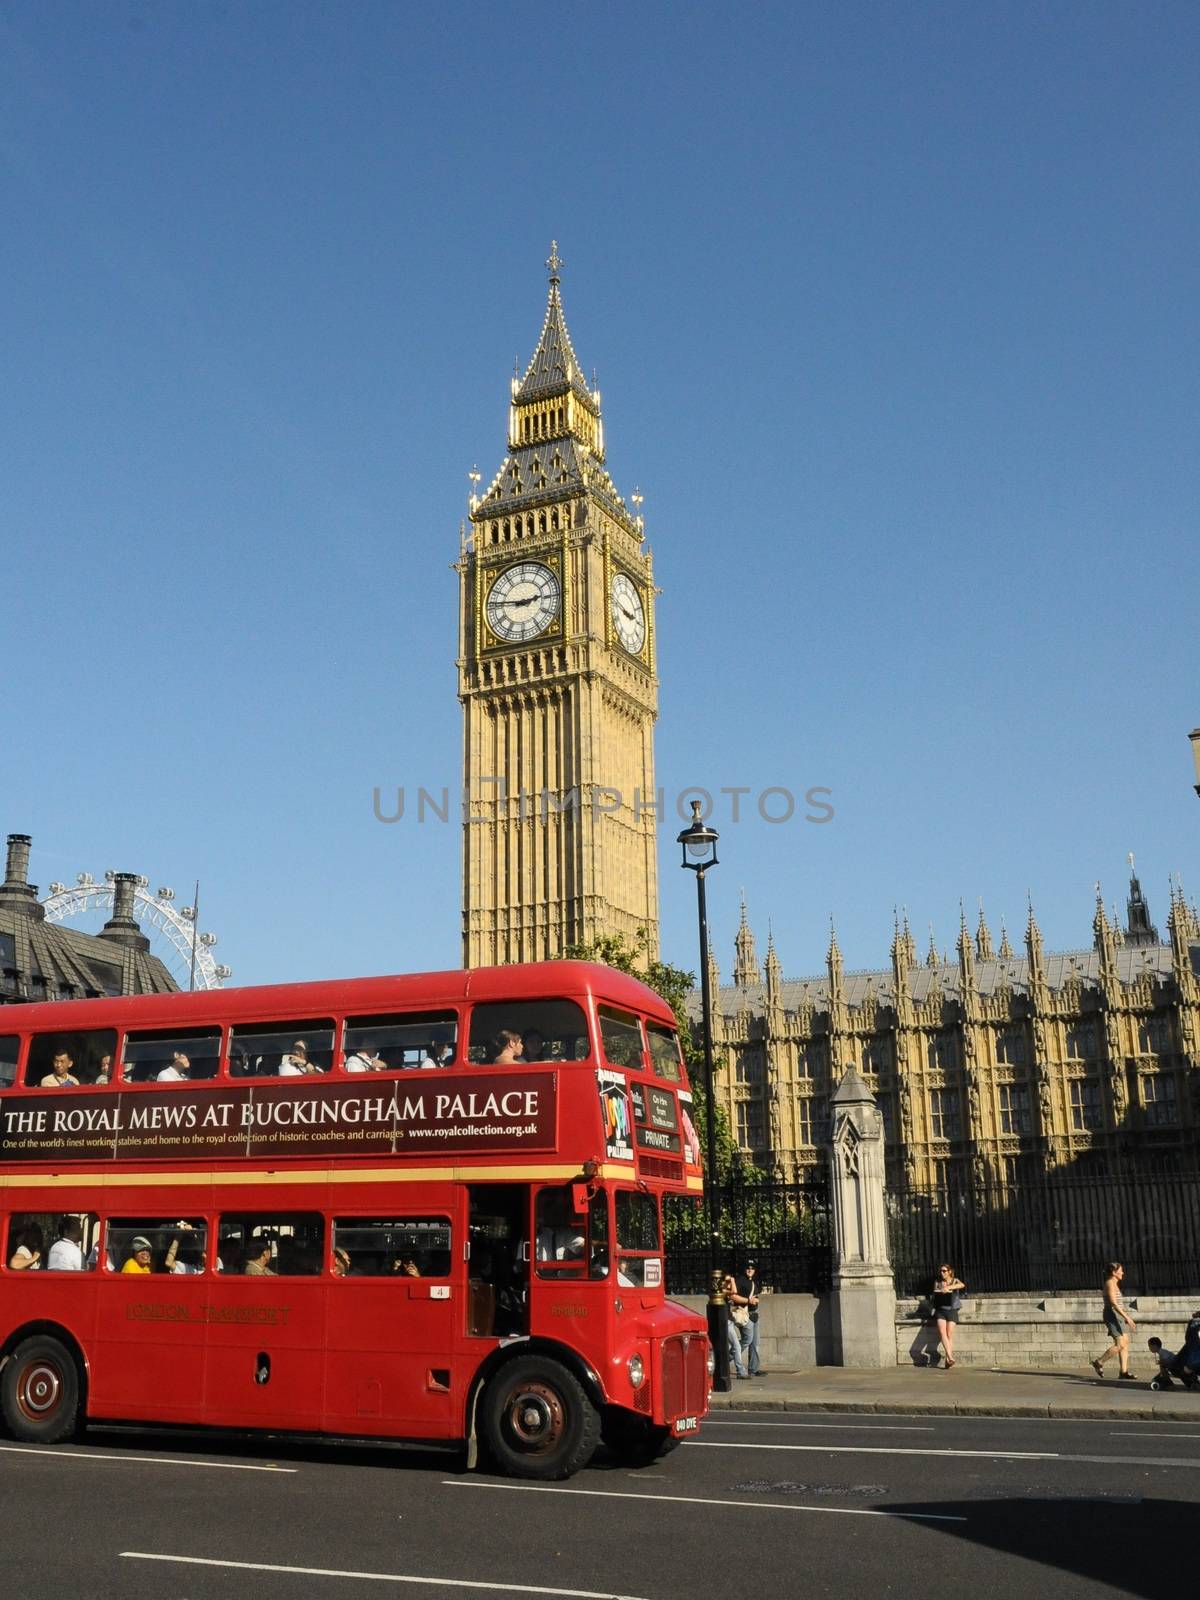 London bus and Big Ben by gorilla